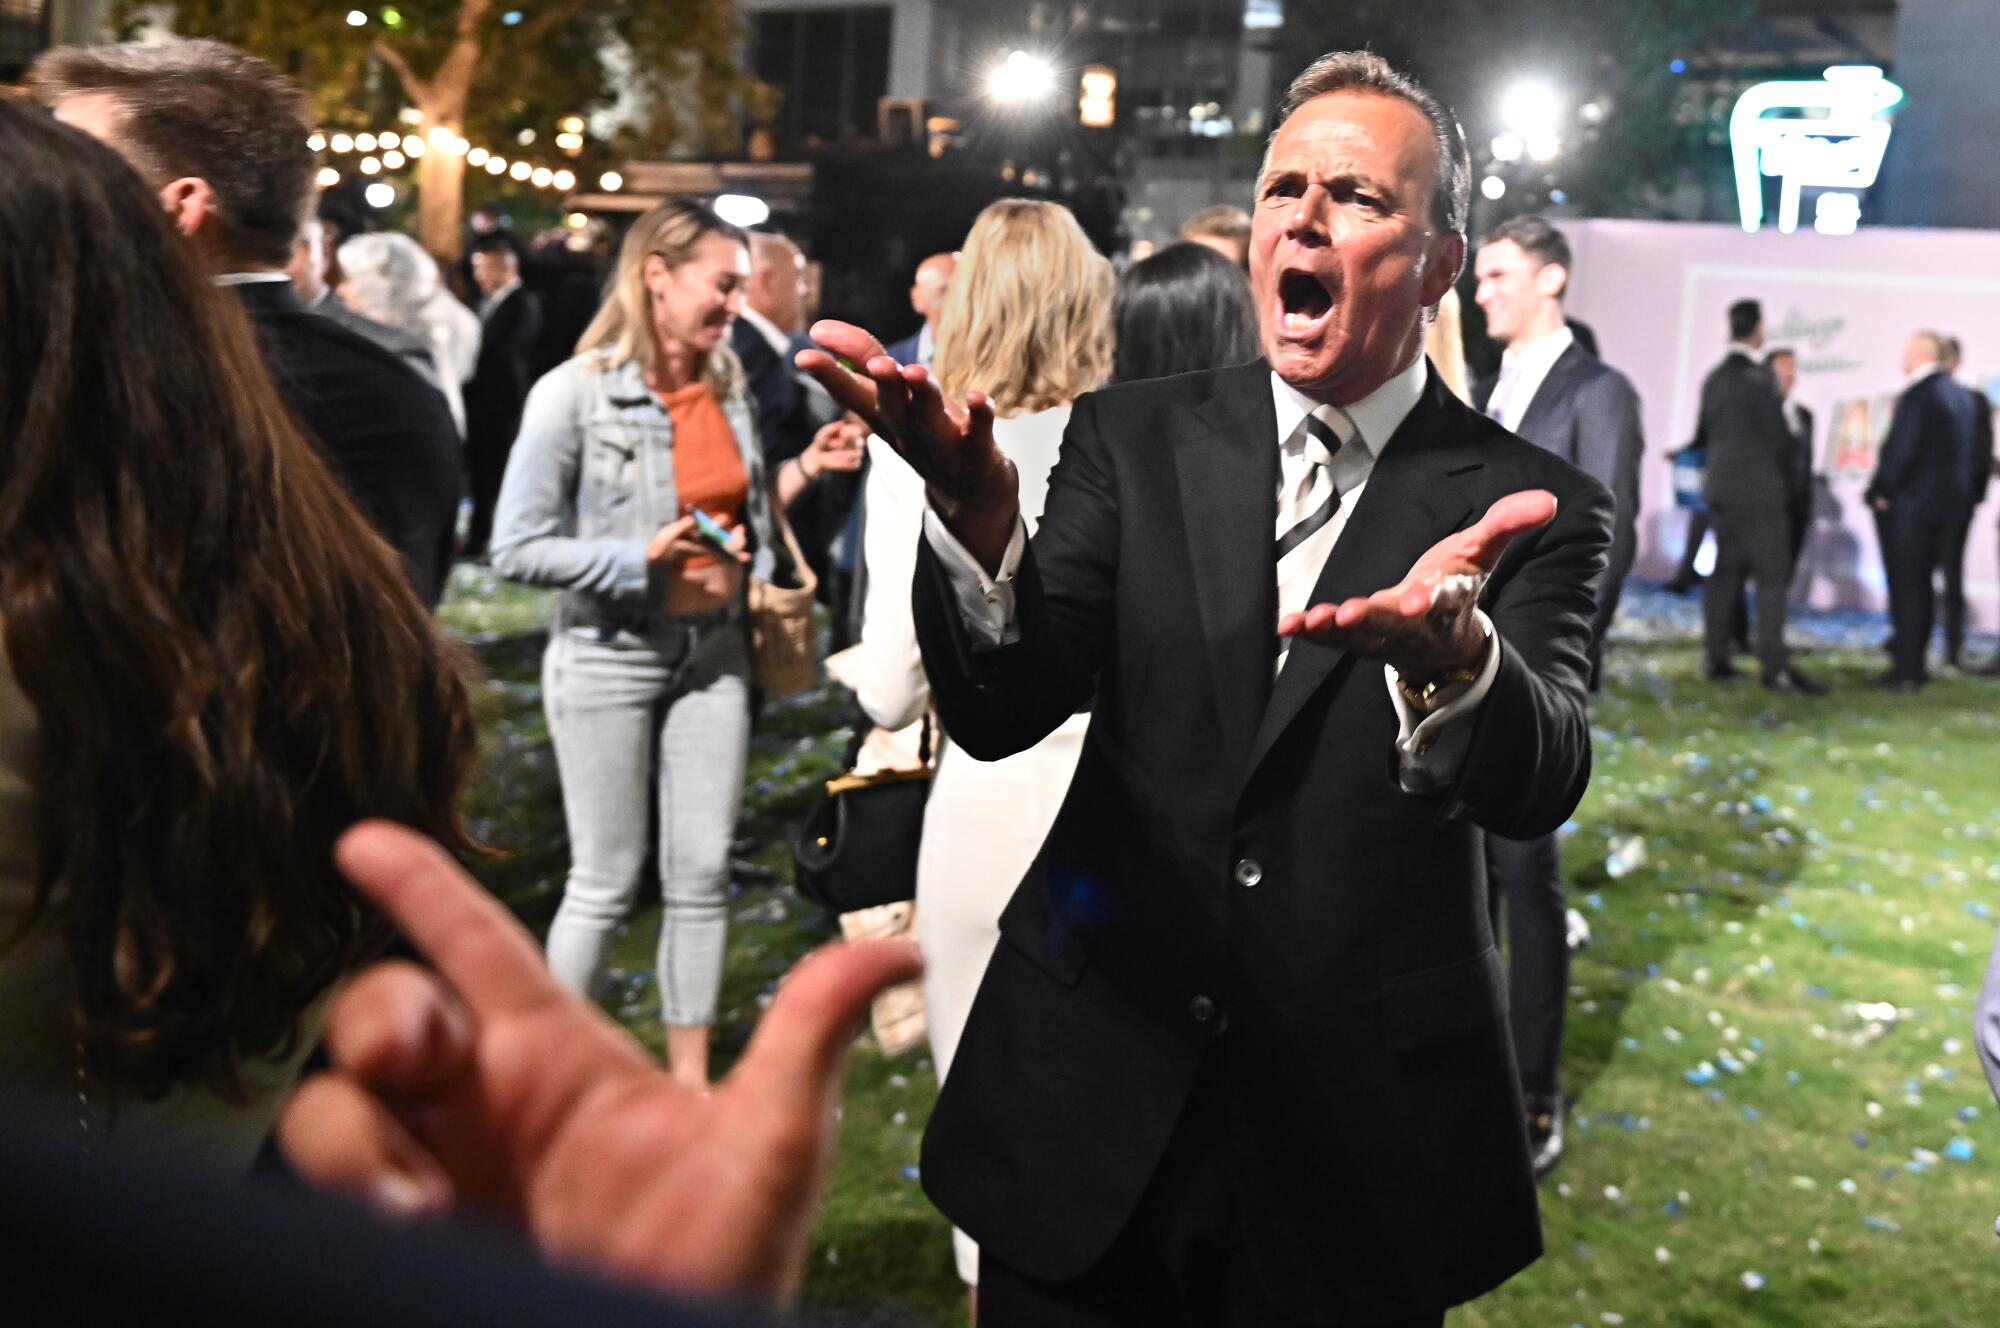 Rick Caruso holding out his hands as he greets supporters at an election event